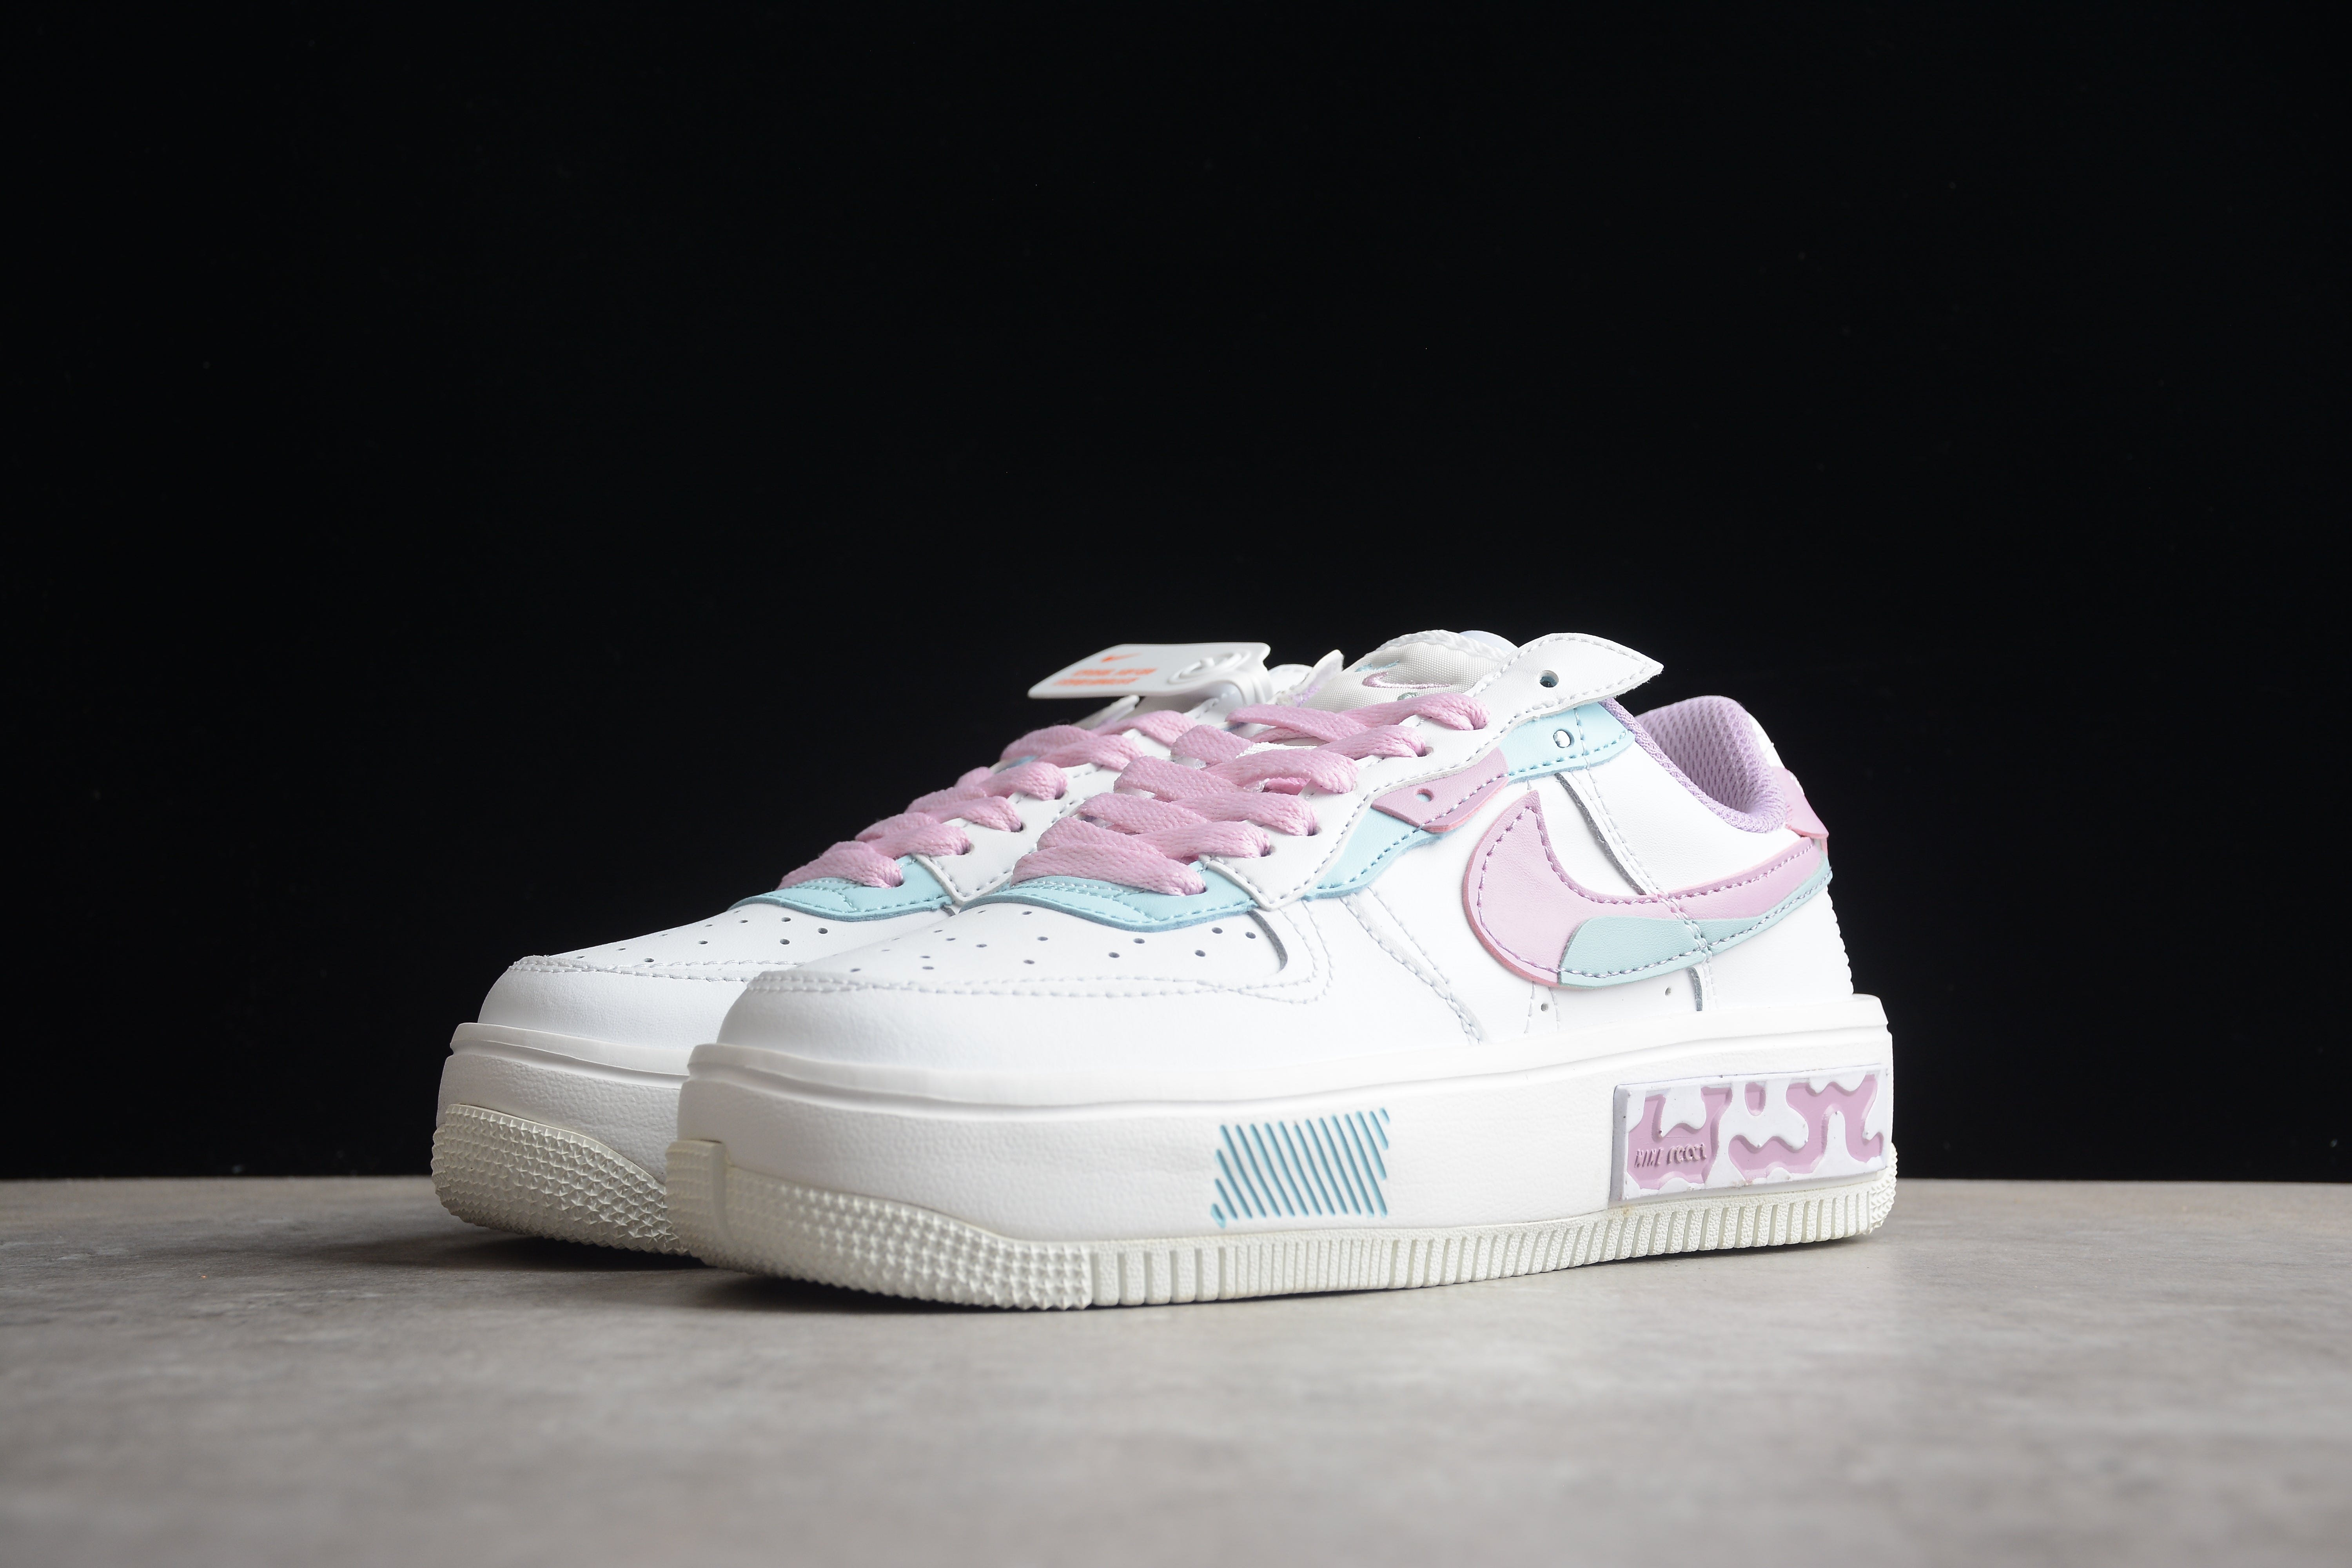 Nike airforce A1 pink shoes